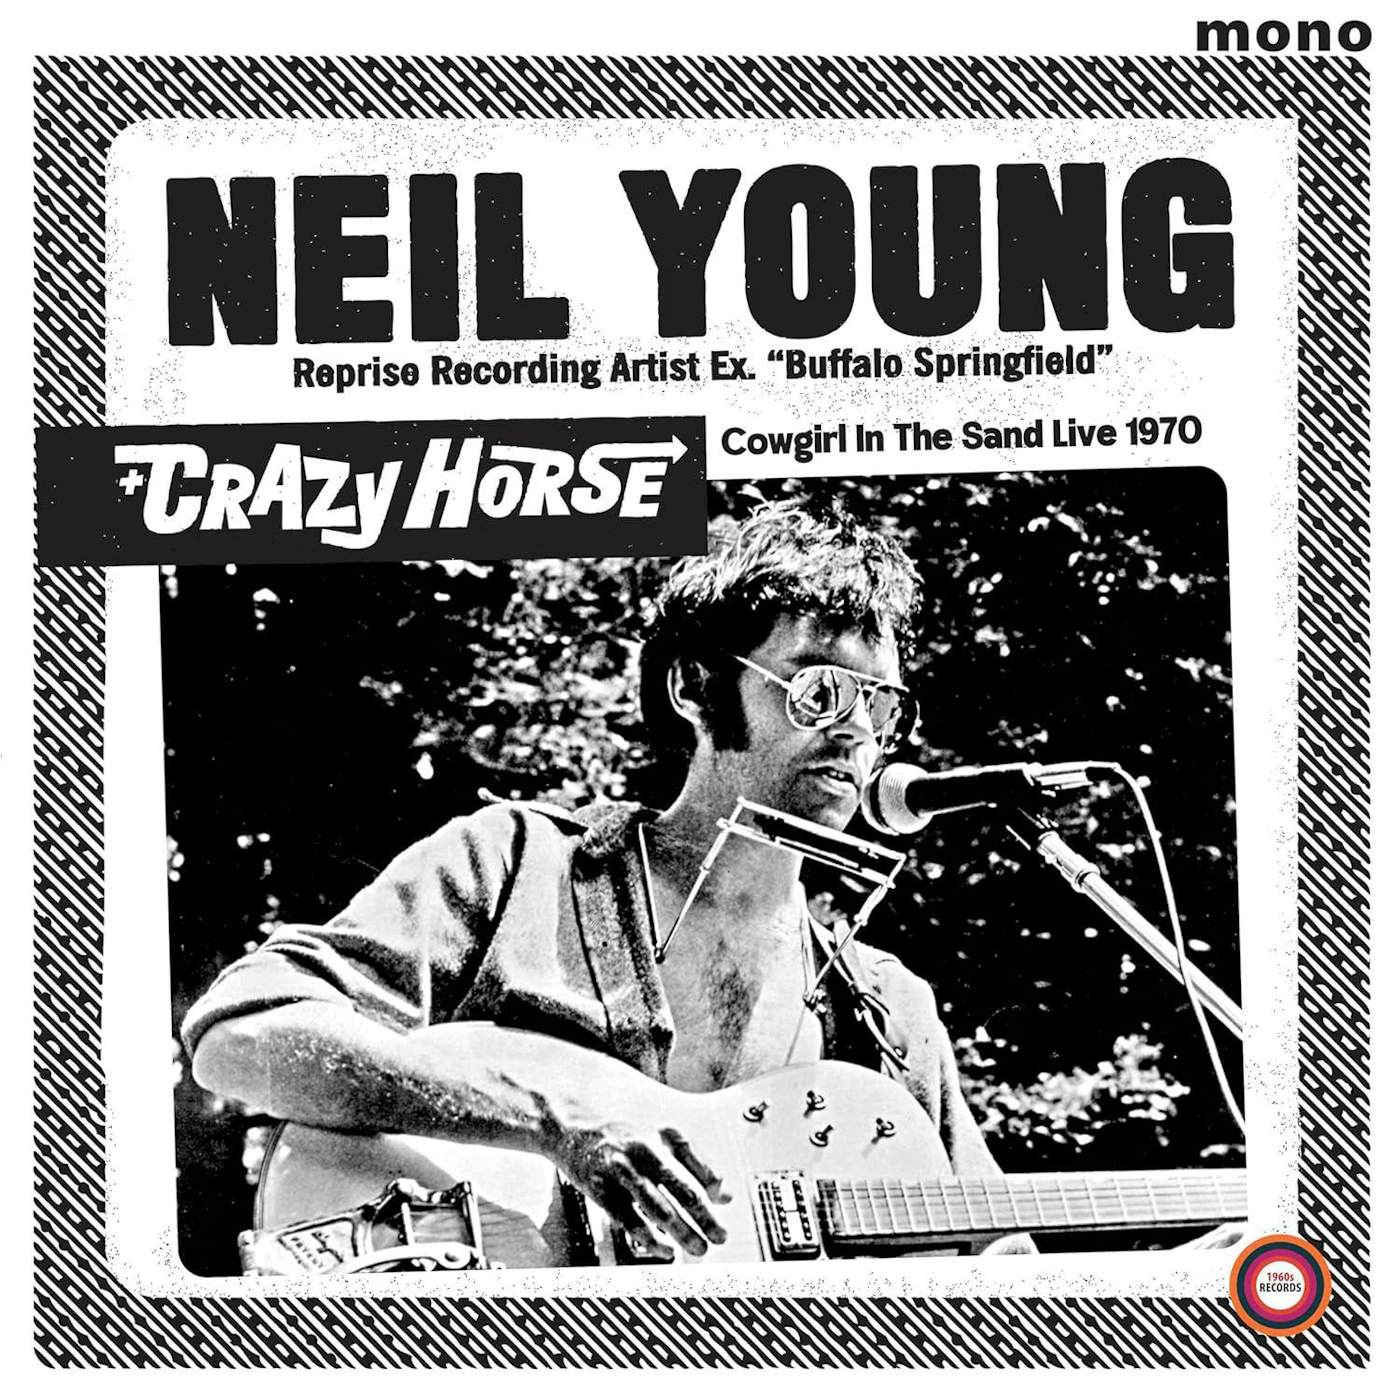 Neil Young & Crazy Horse Cowgirl In The Sand - Live 1970 Vinyl Record